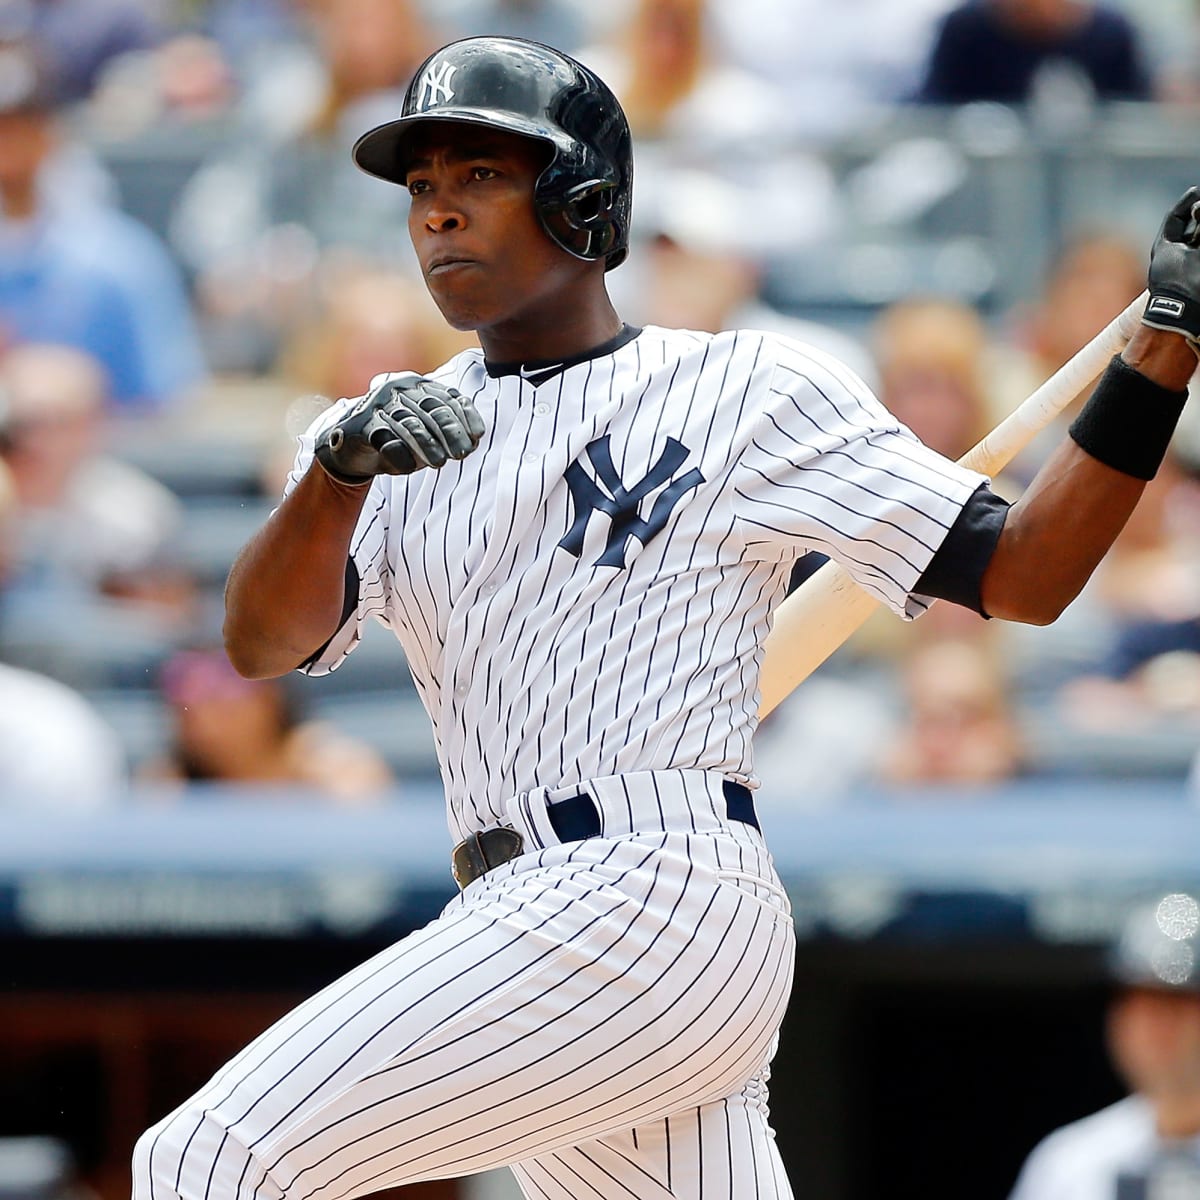 Alfonso Soriano is retiring, here are 8 facts you may not know